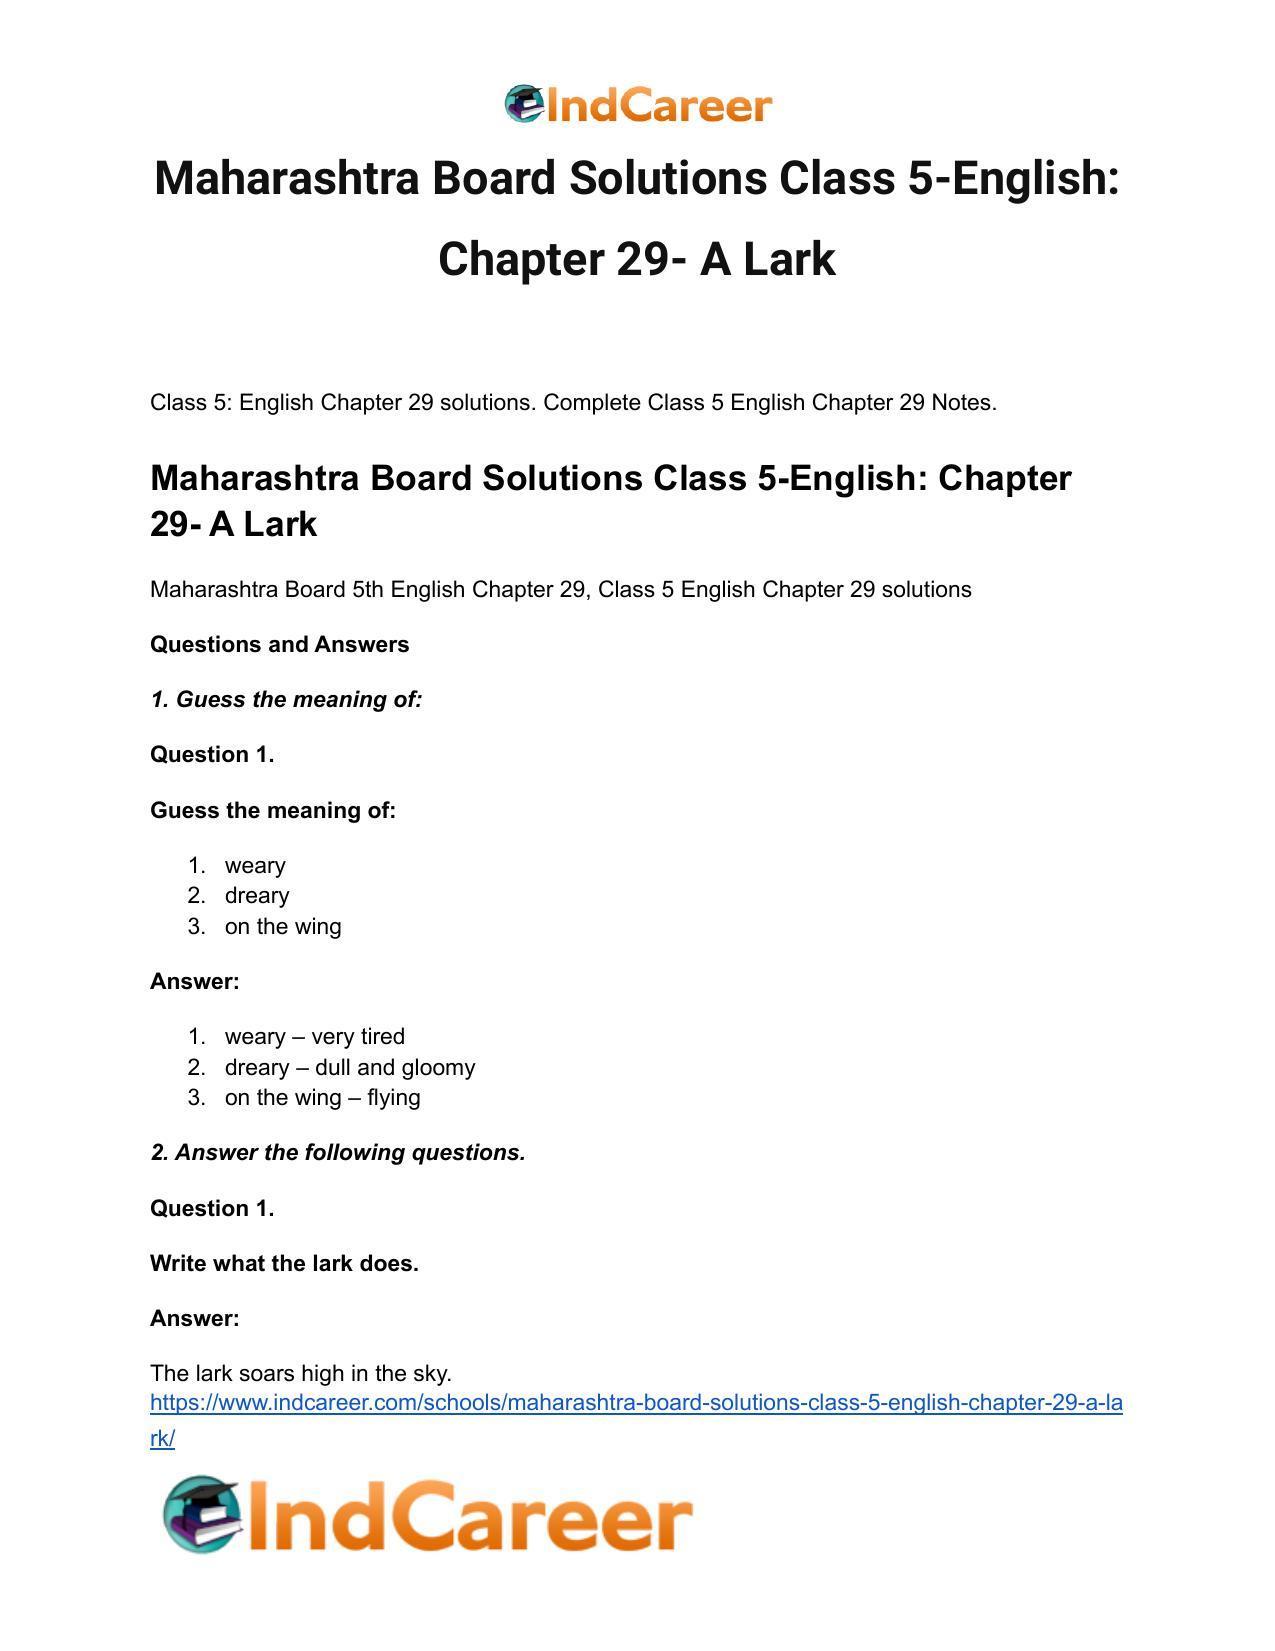 Maharashtra Board Solutions Class 5-English: Chapter 29- A Lark - Page 2